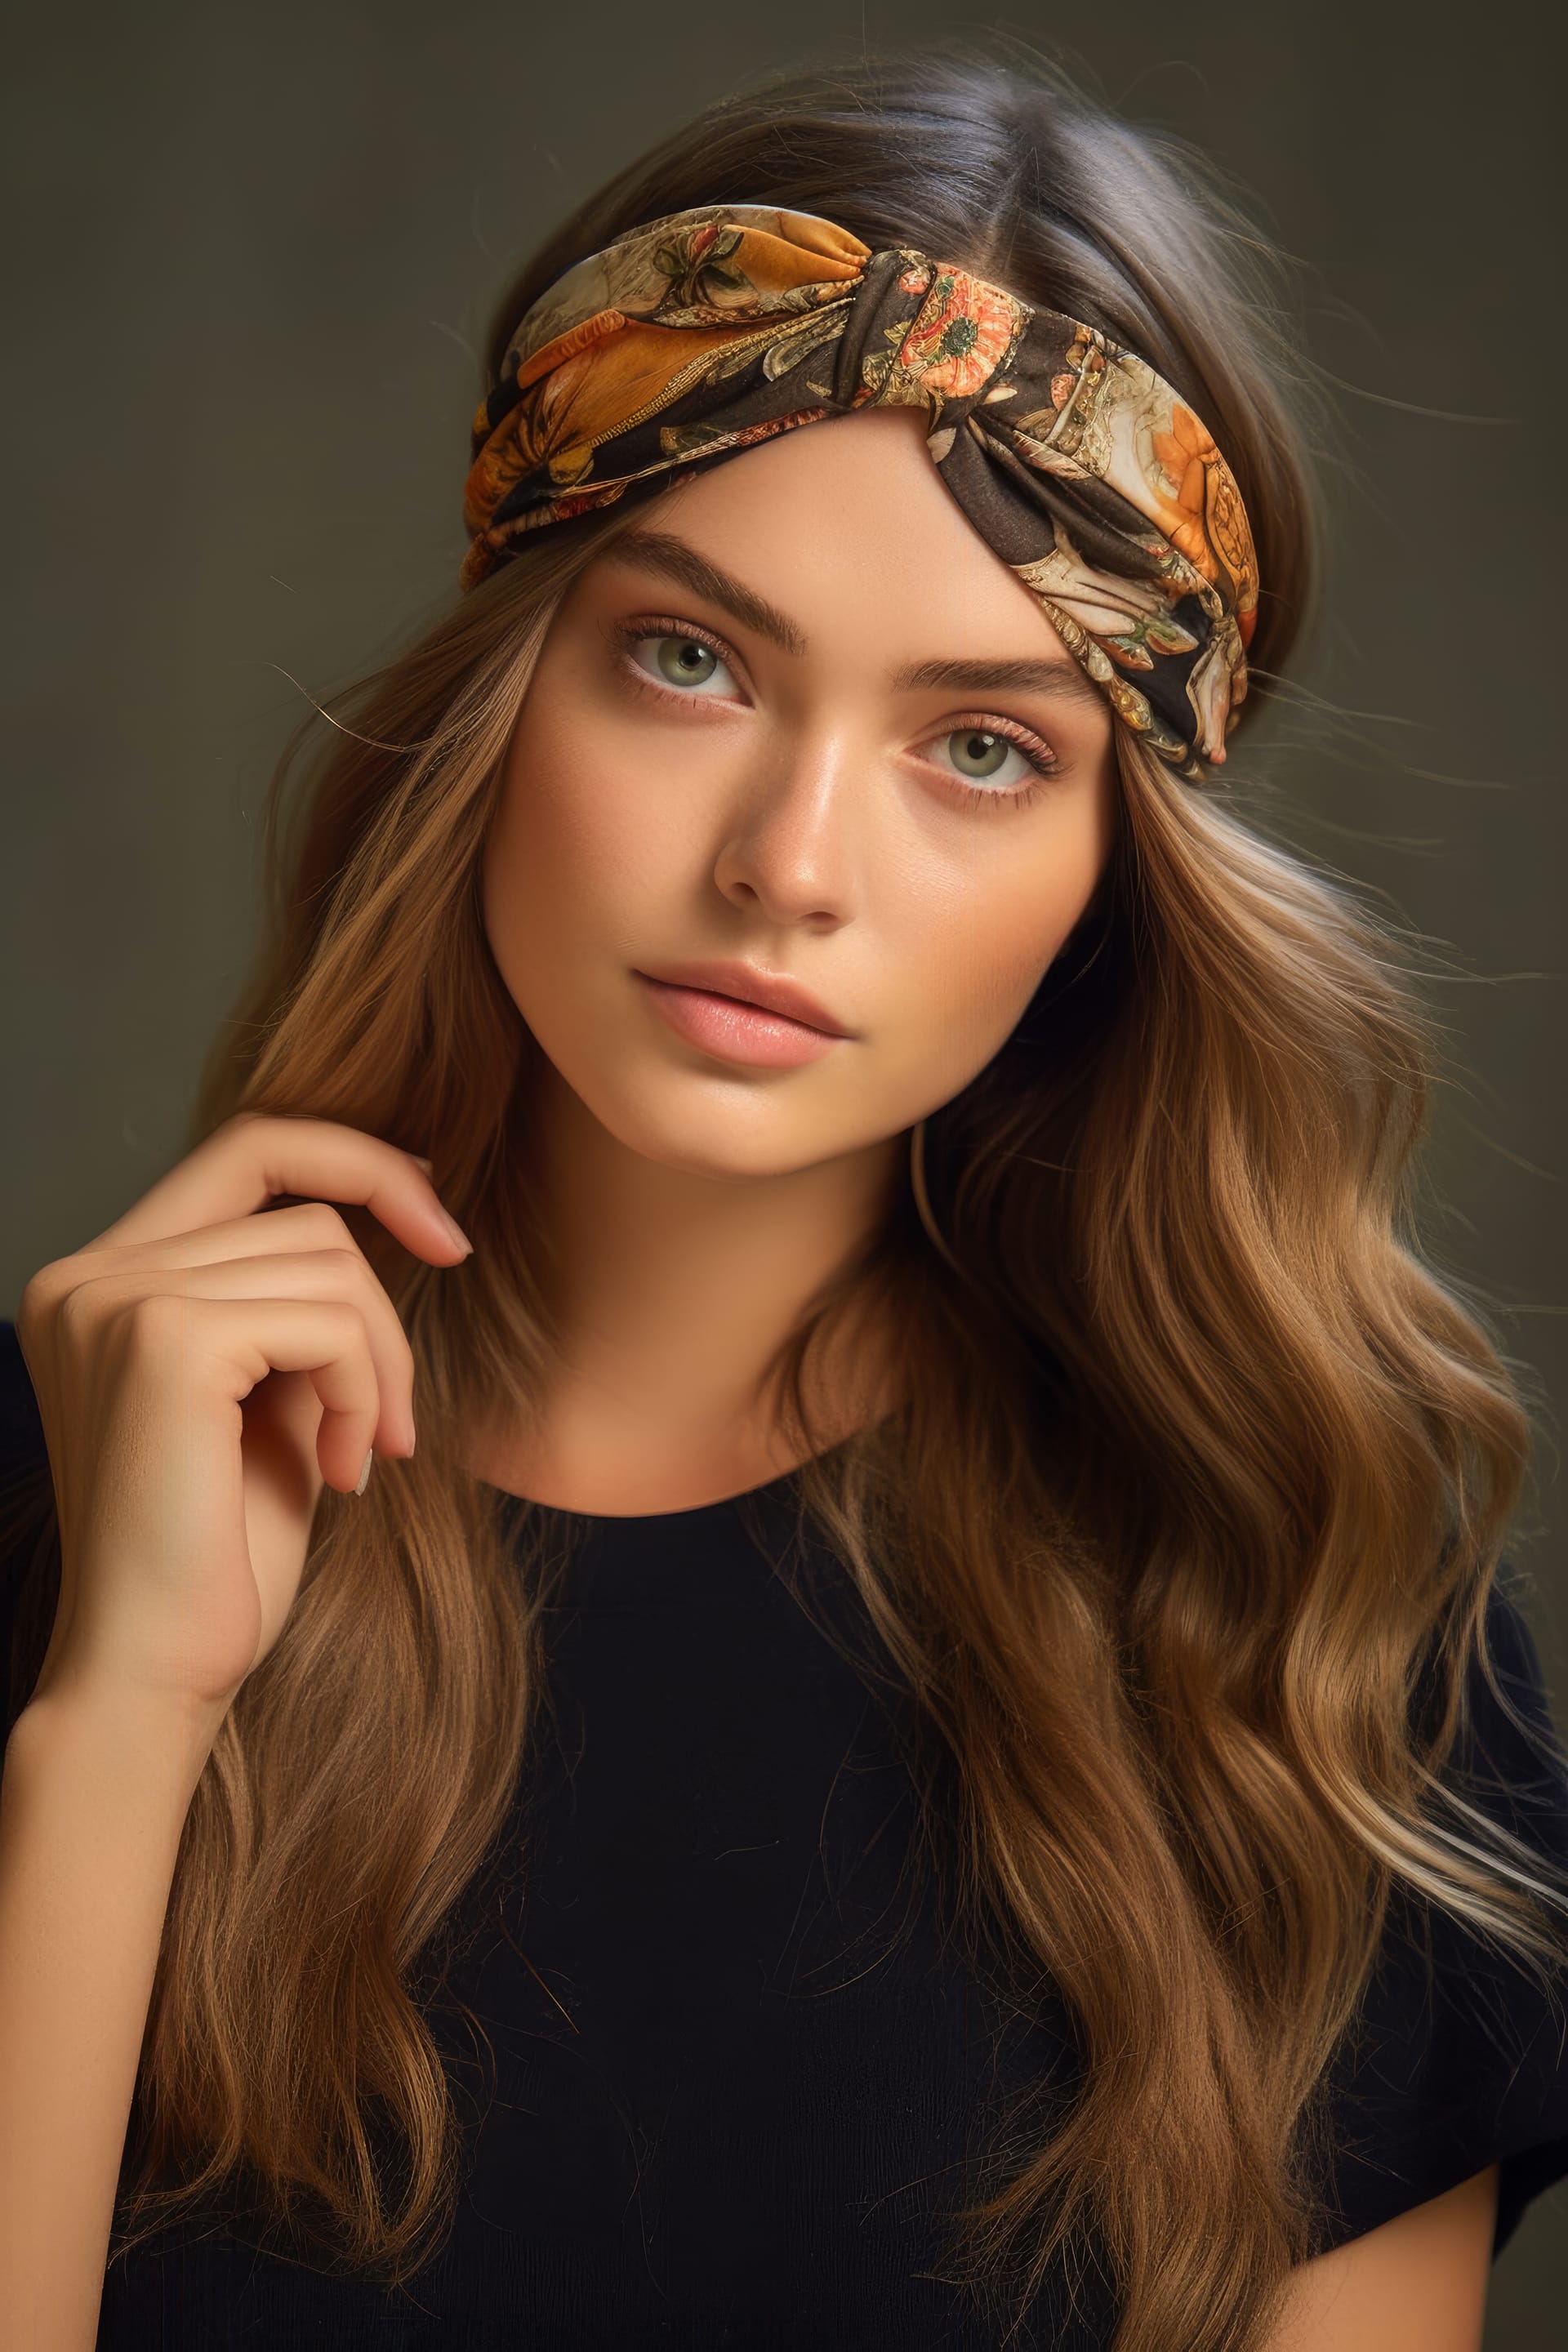 Model wearing headband best profile picture for facebook